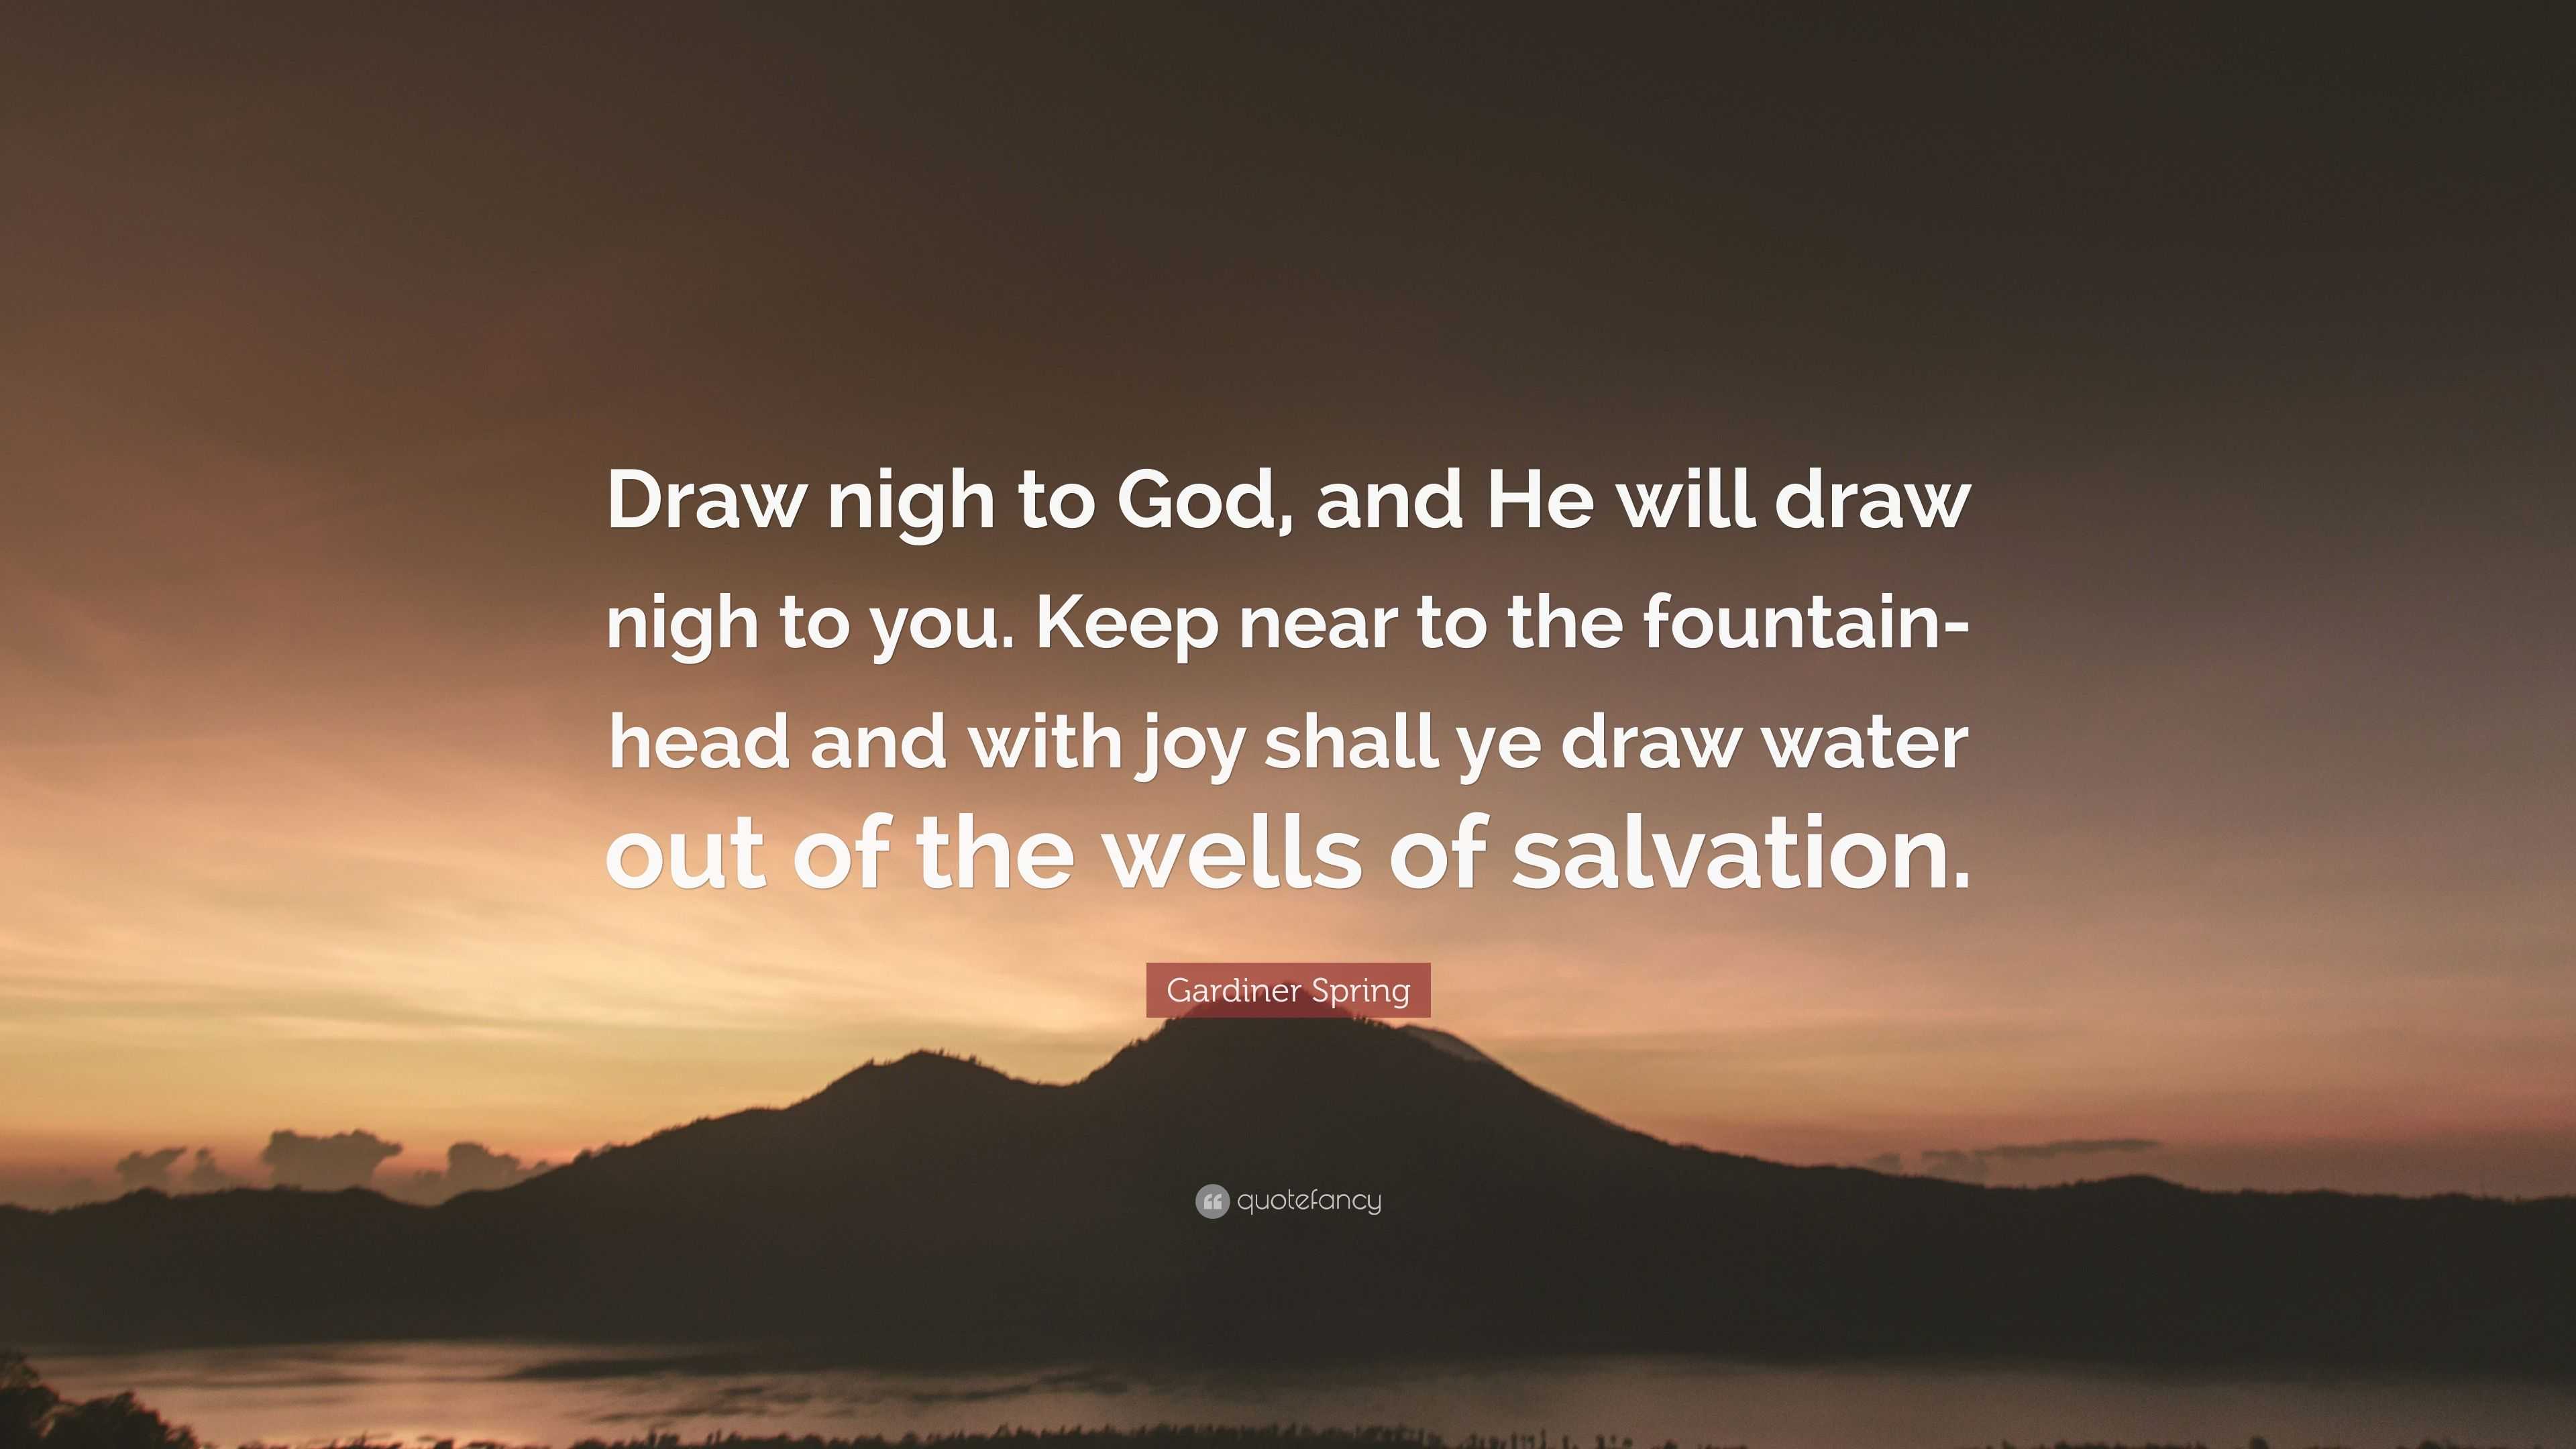 Gardiner Spring Quote “Draw nigh to God, and He will draw nigh to you